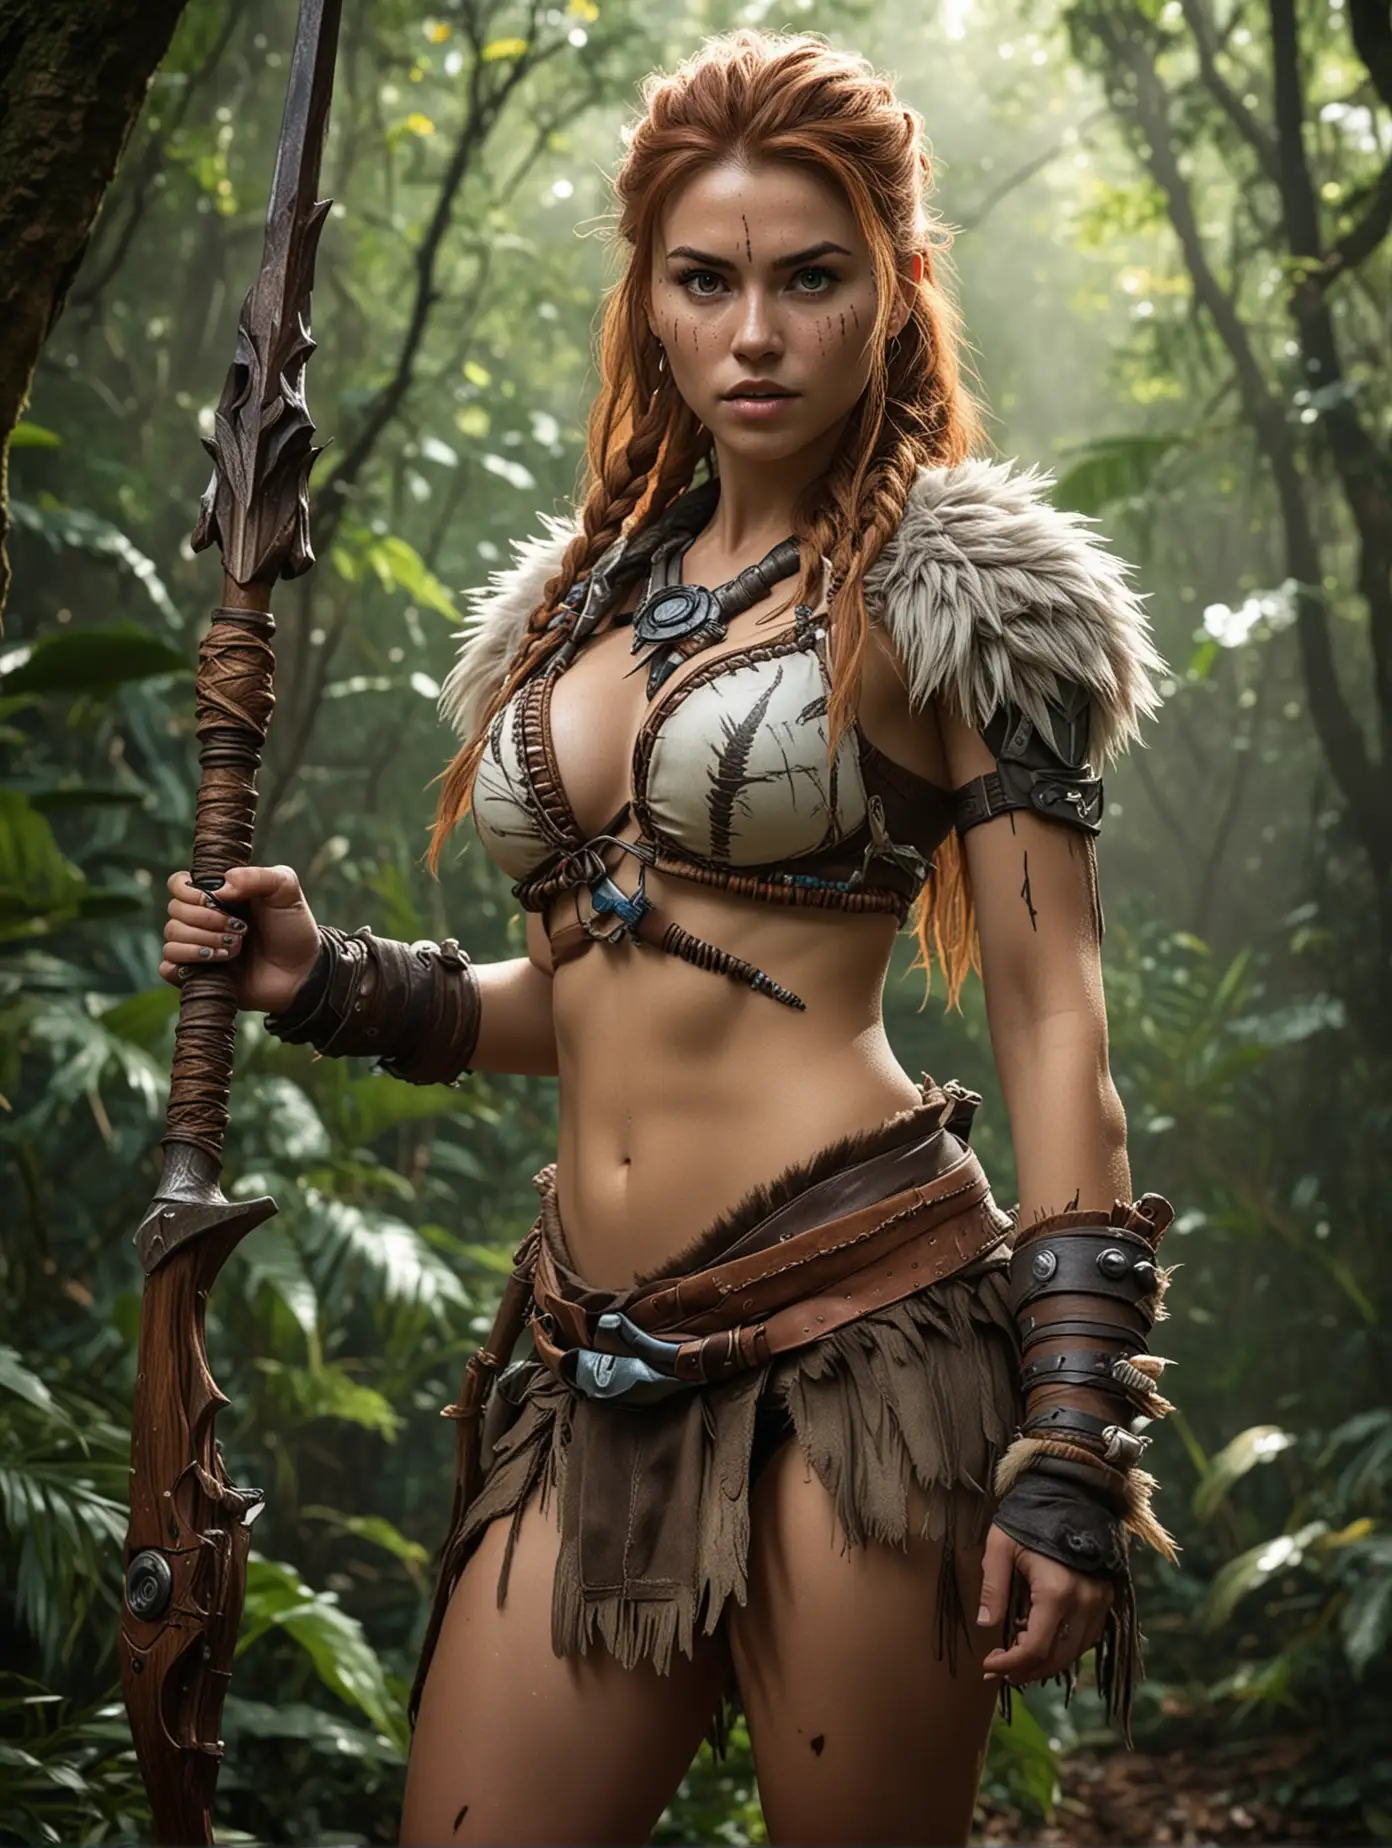 Aloy wearing a Horizon Forbidden west techno cosplay outfit, hunting in the jungle, holding a spear, large natural shaped breasts, topless, fur, machine parts, cleavage, random details, imperfection, sweaty skin, perspiration, skin texture, skin pores, freckles on nose and cheeks, perfect legs, ab muscles, dark vignette